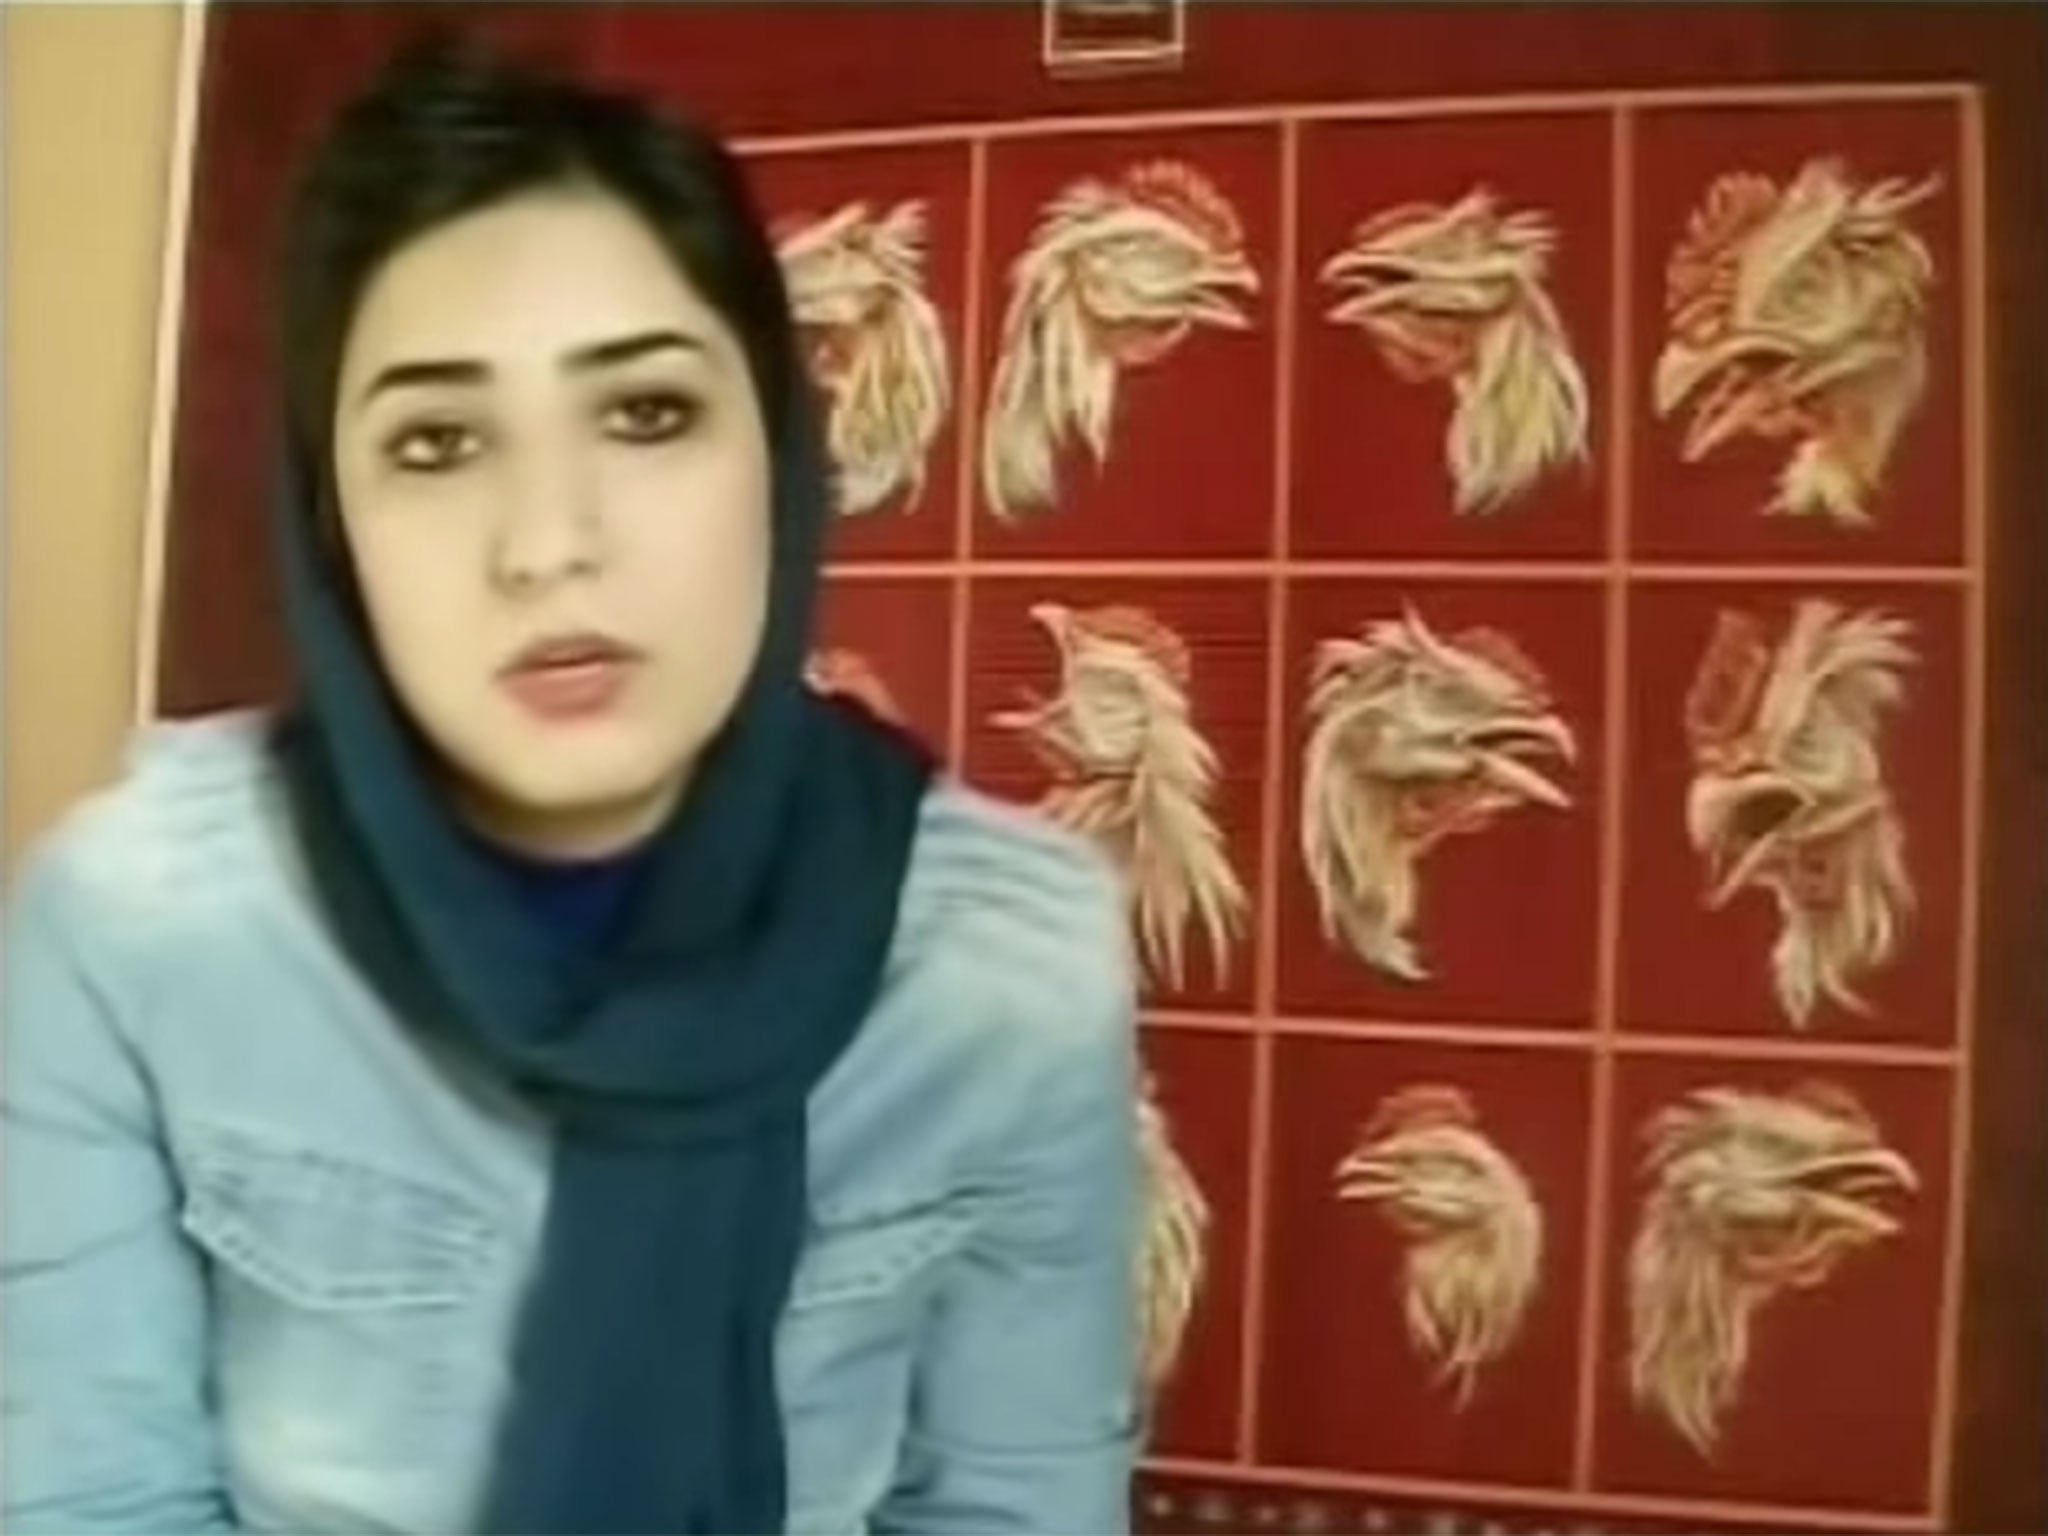 The artist and activist Atena Farghadani, 26, has been jailed over her protests against the new laws, Amnesty said